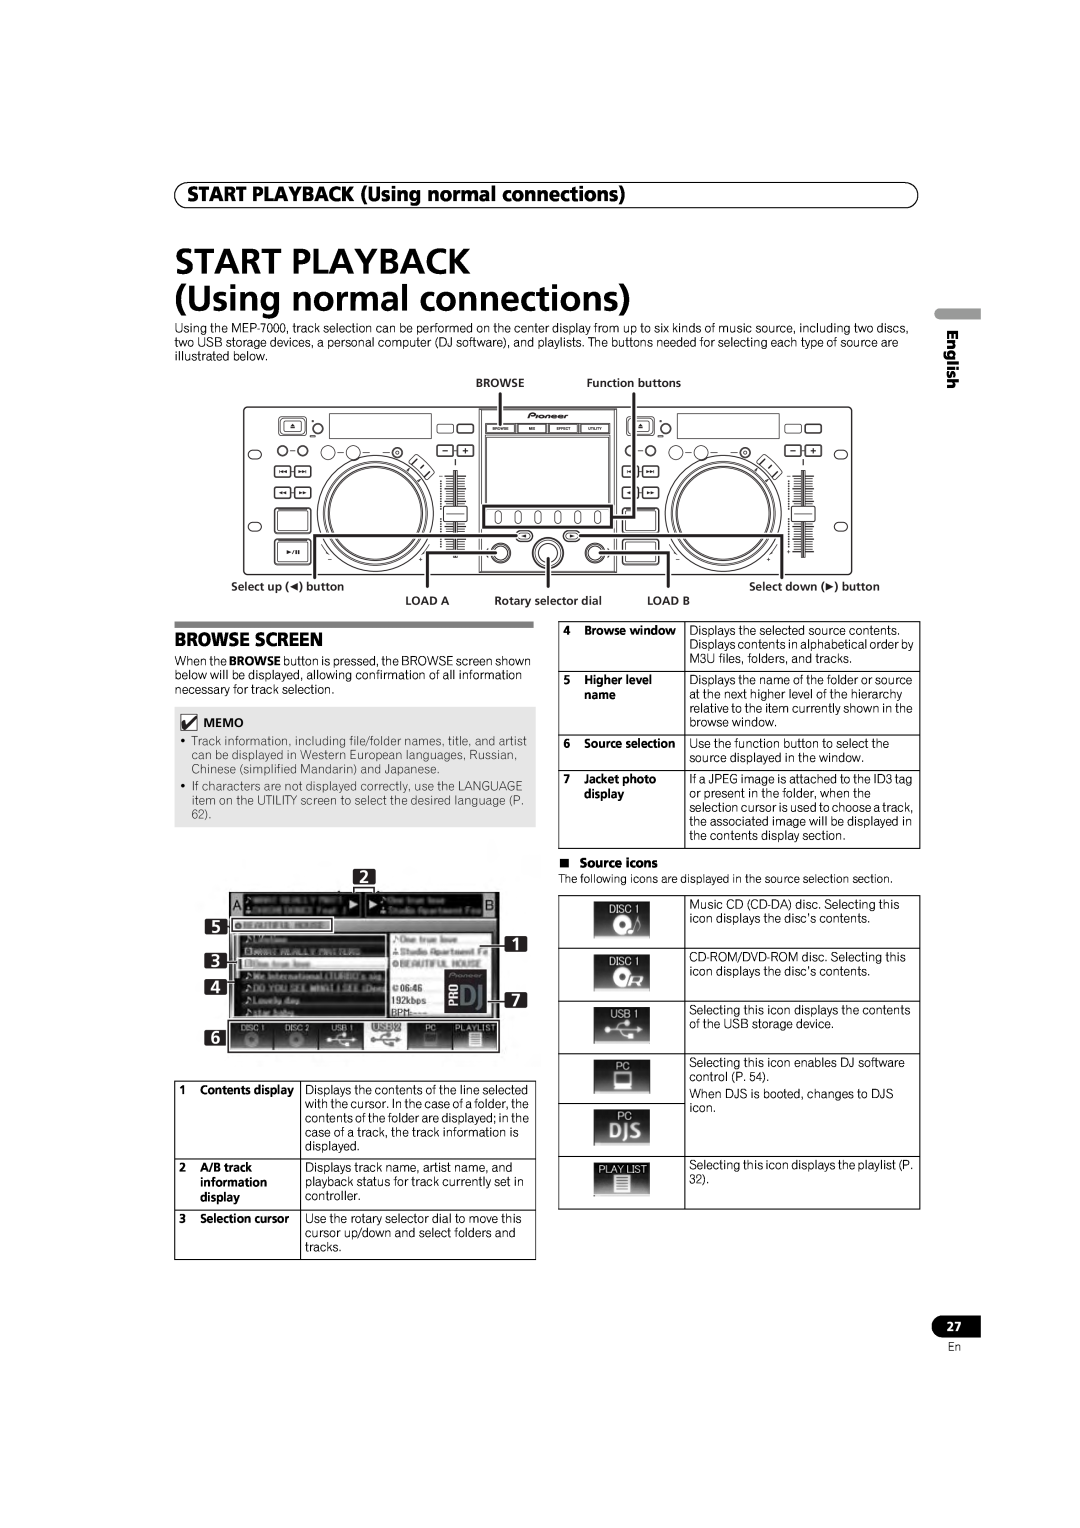 Pioneer MEP-7000 START PLAYBACK Using normal connections, Browse Screen, English, Source icons, Select up button, Load A 